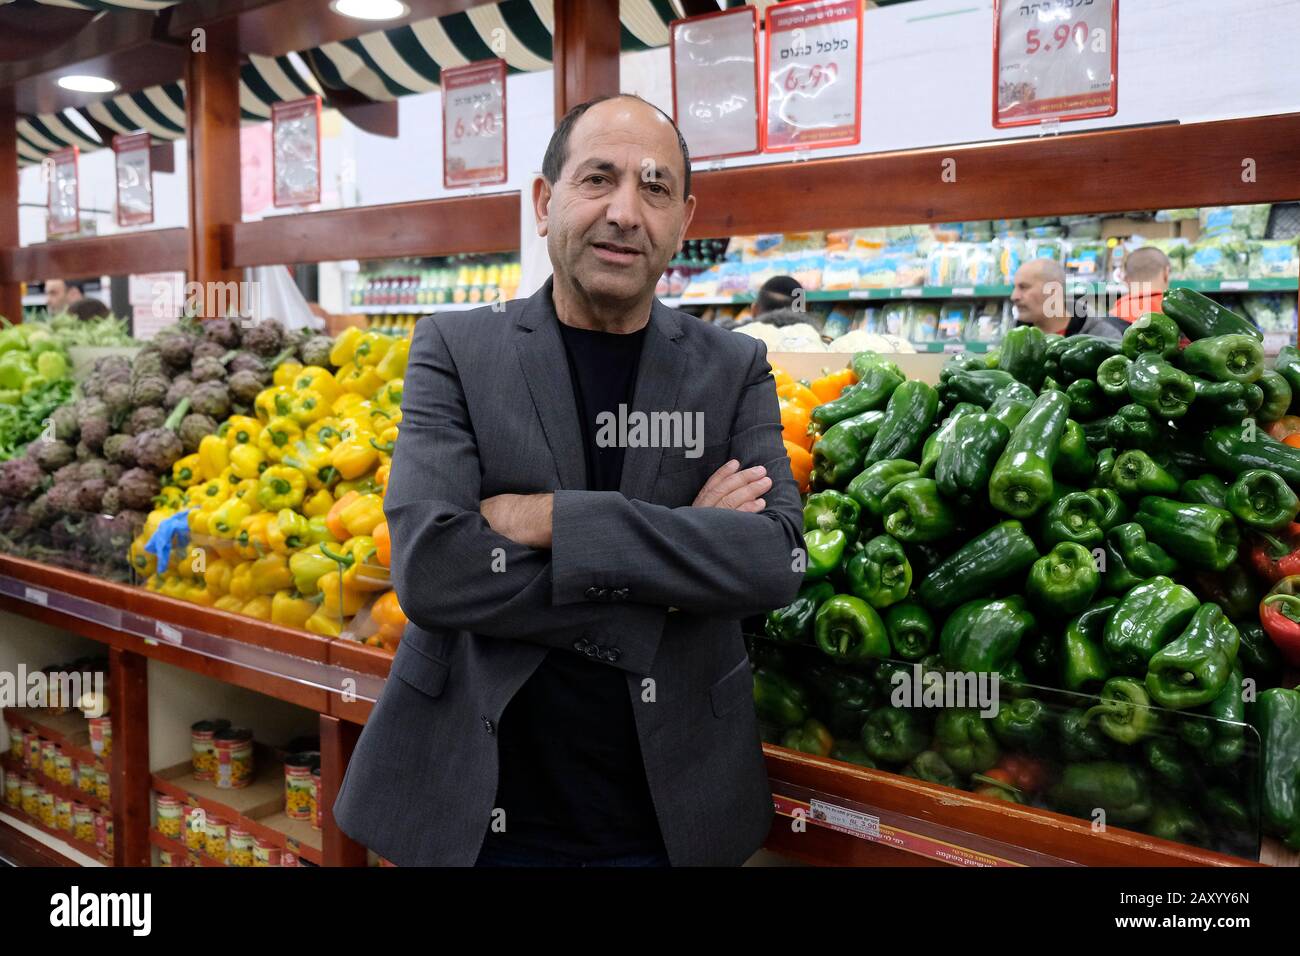 Rami Levy owner of Rami Levy Hashikma Marketing an Israeli retail  supermarket chain that operates throughout Israel, including the West Bank  posing in a branch of Ramy Levy supermarket in Atarot industrial